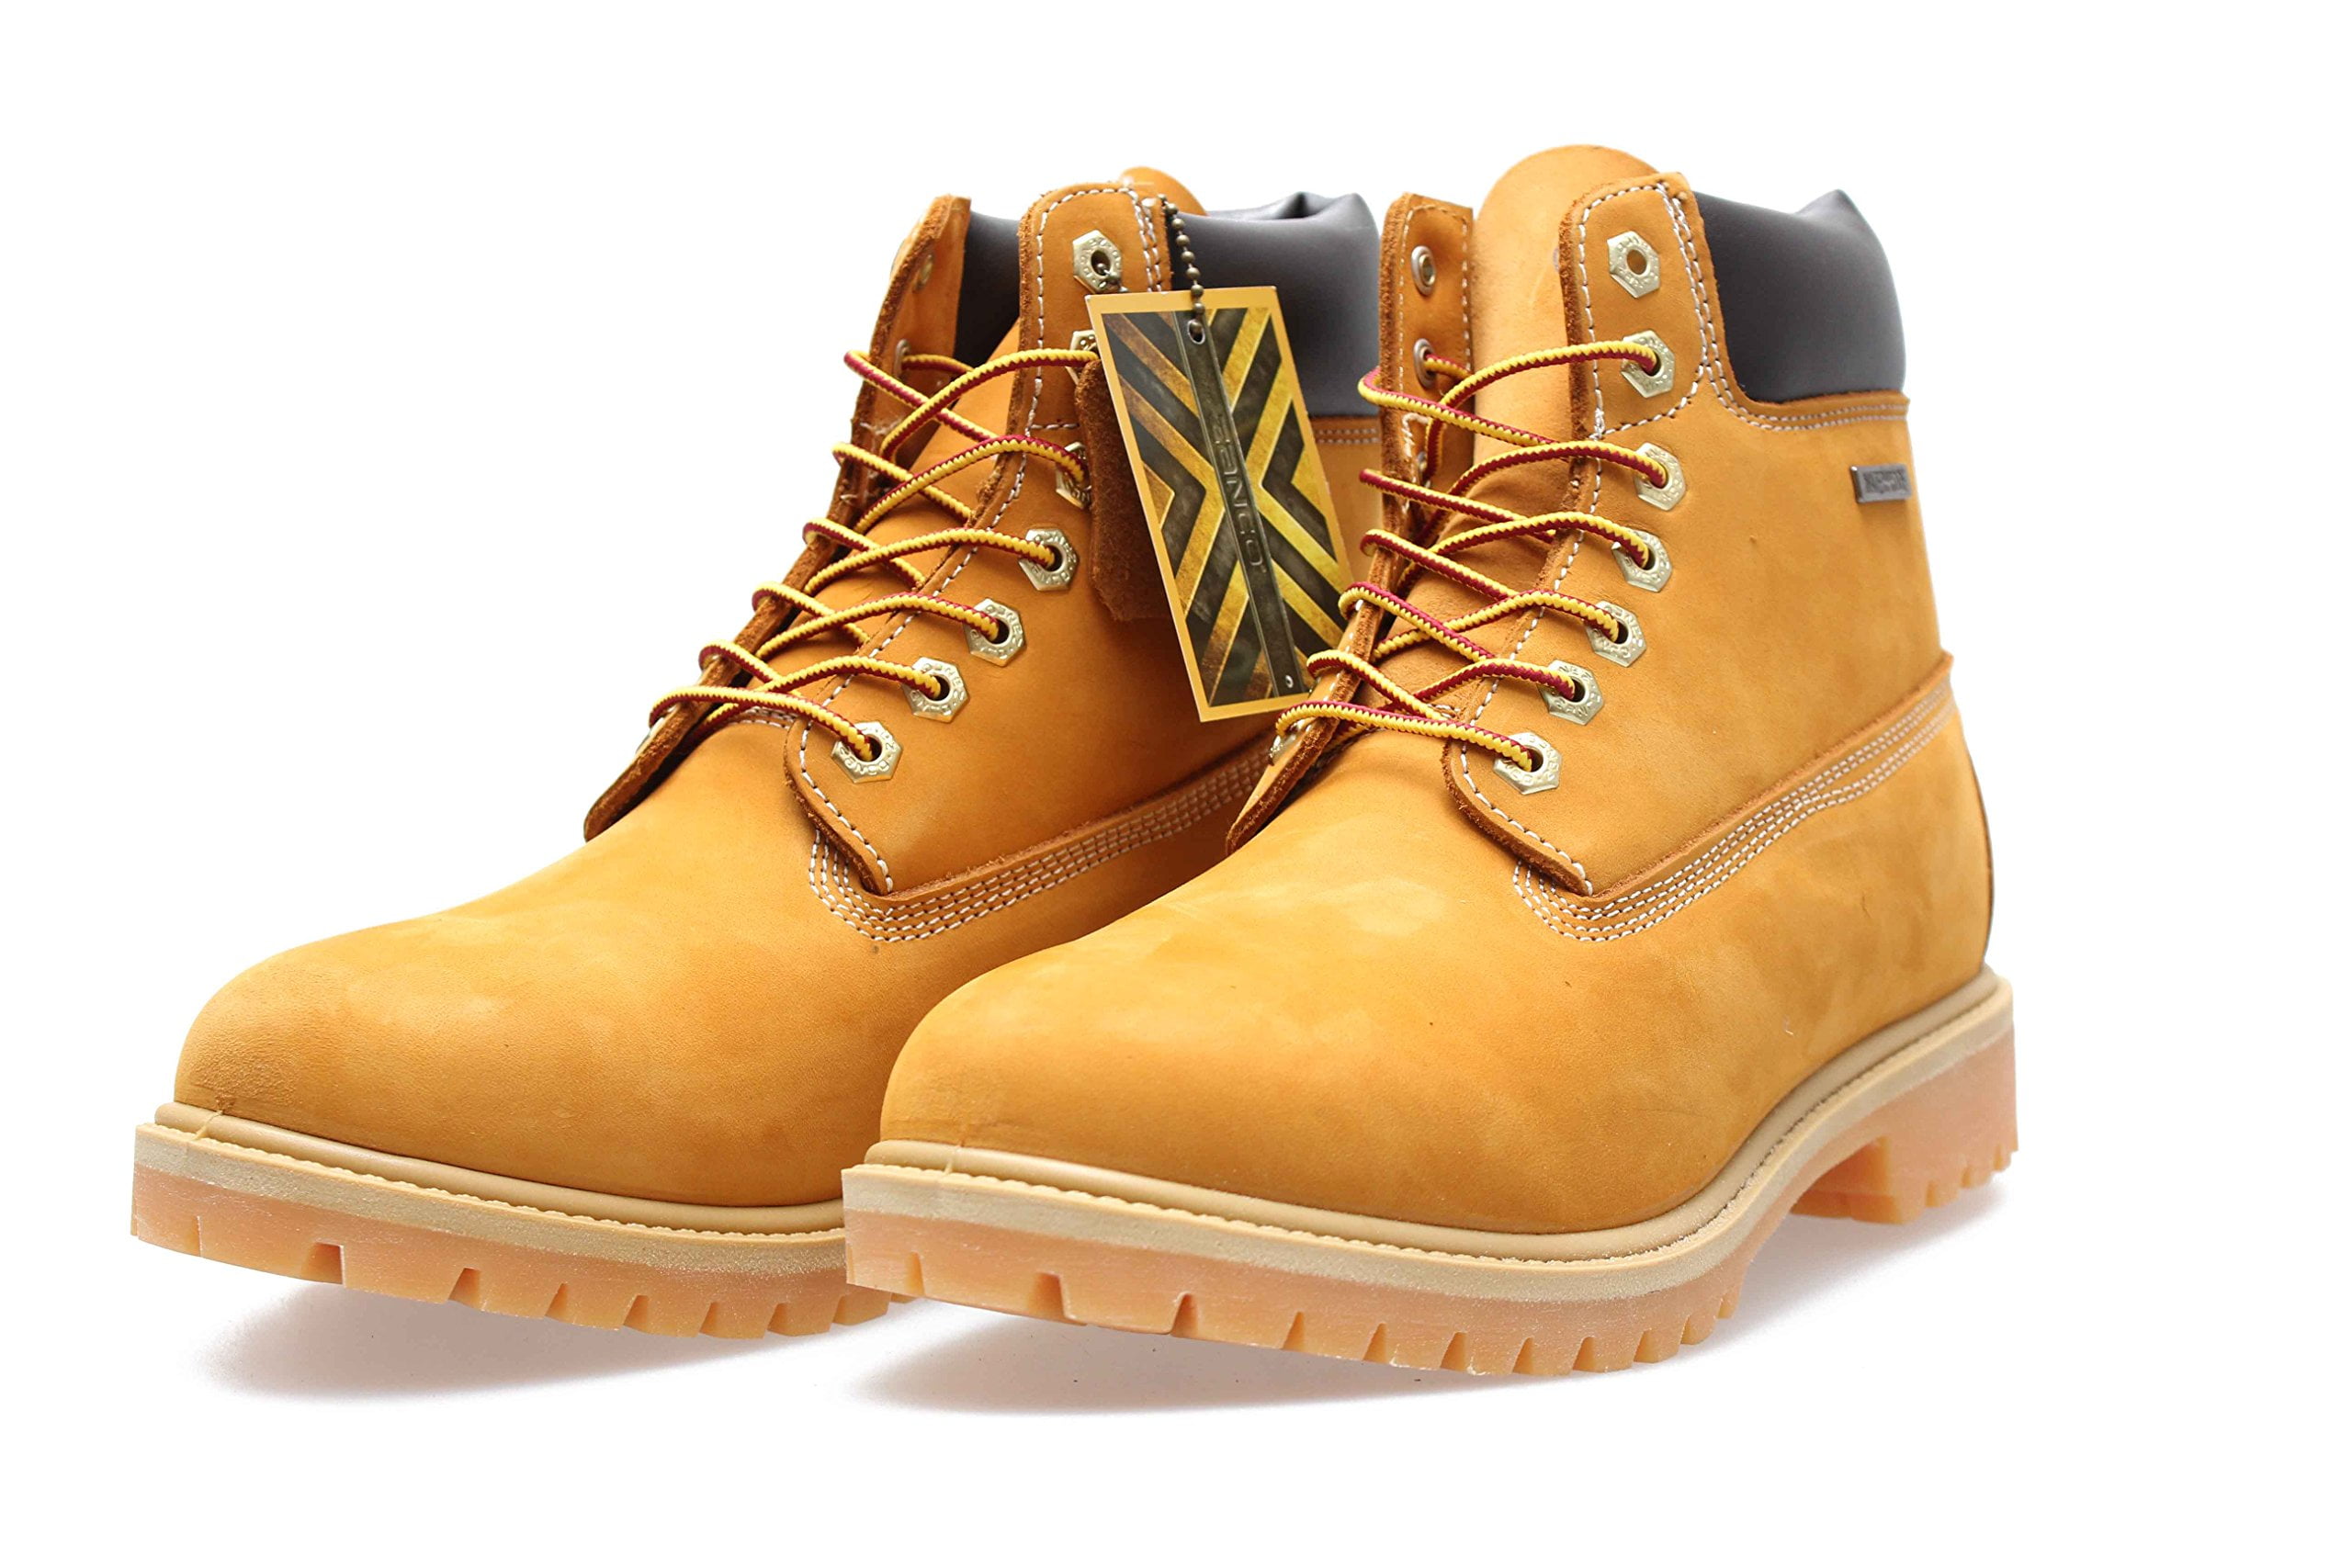 construction work boots